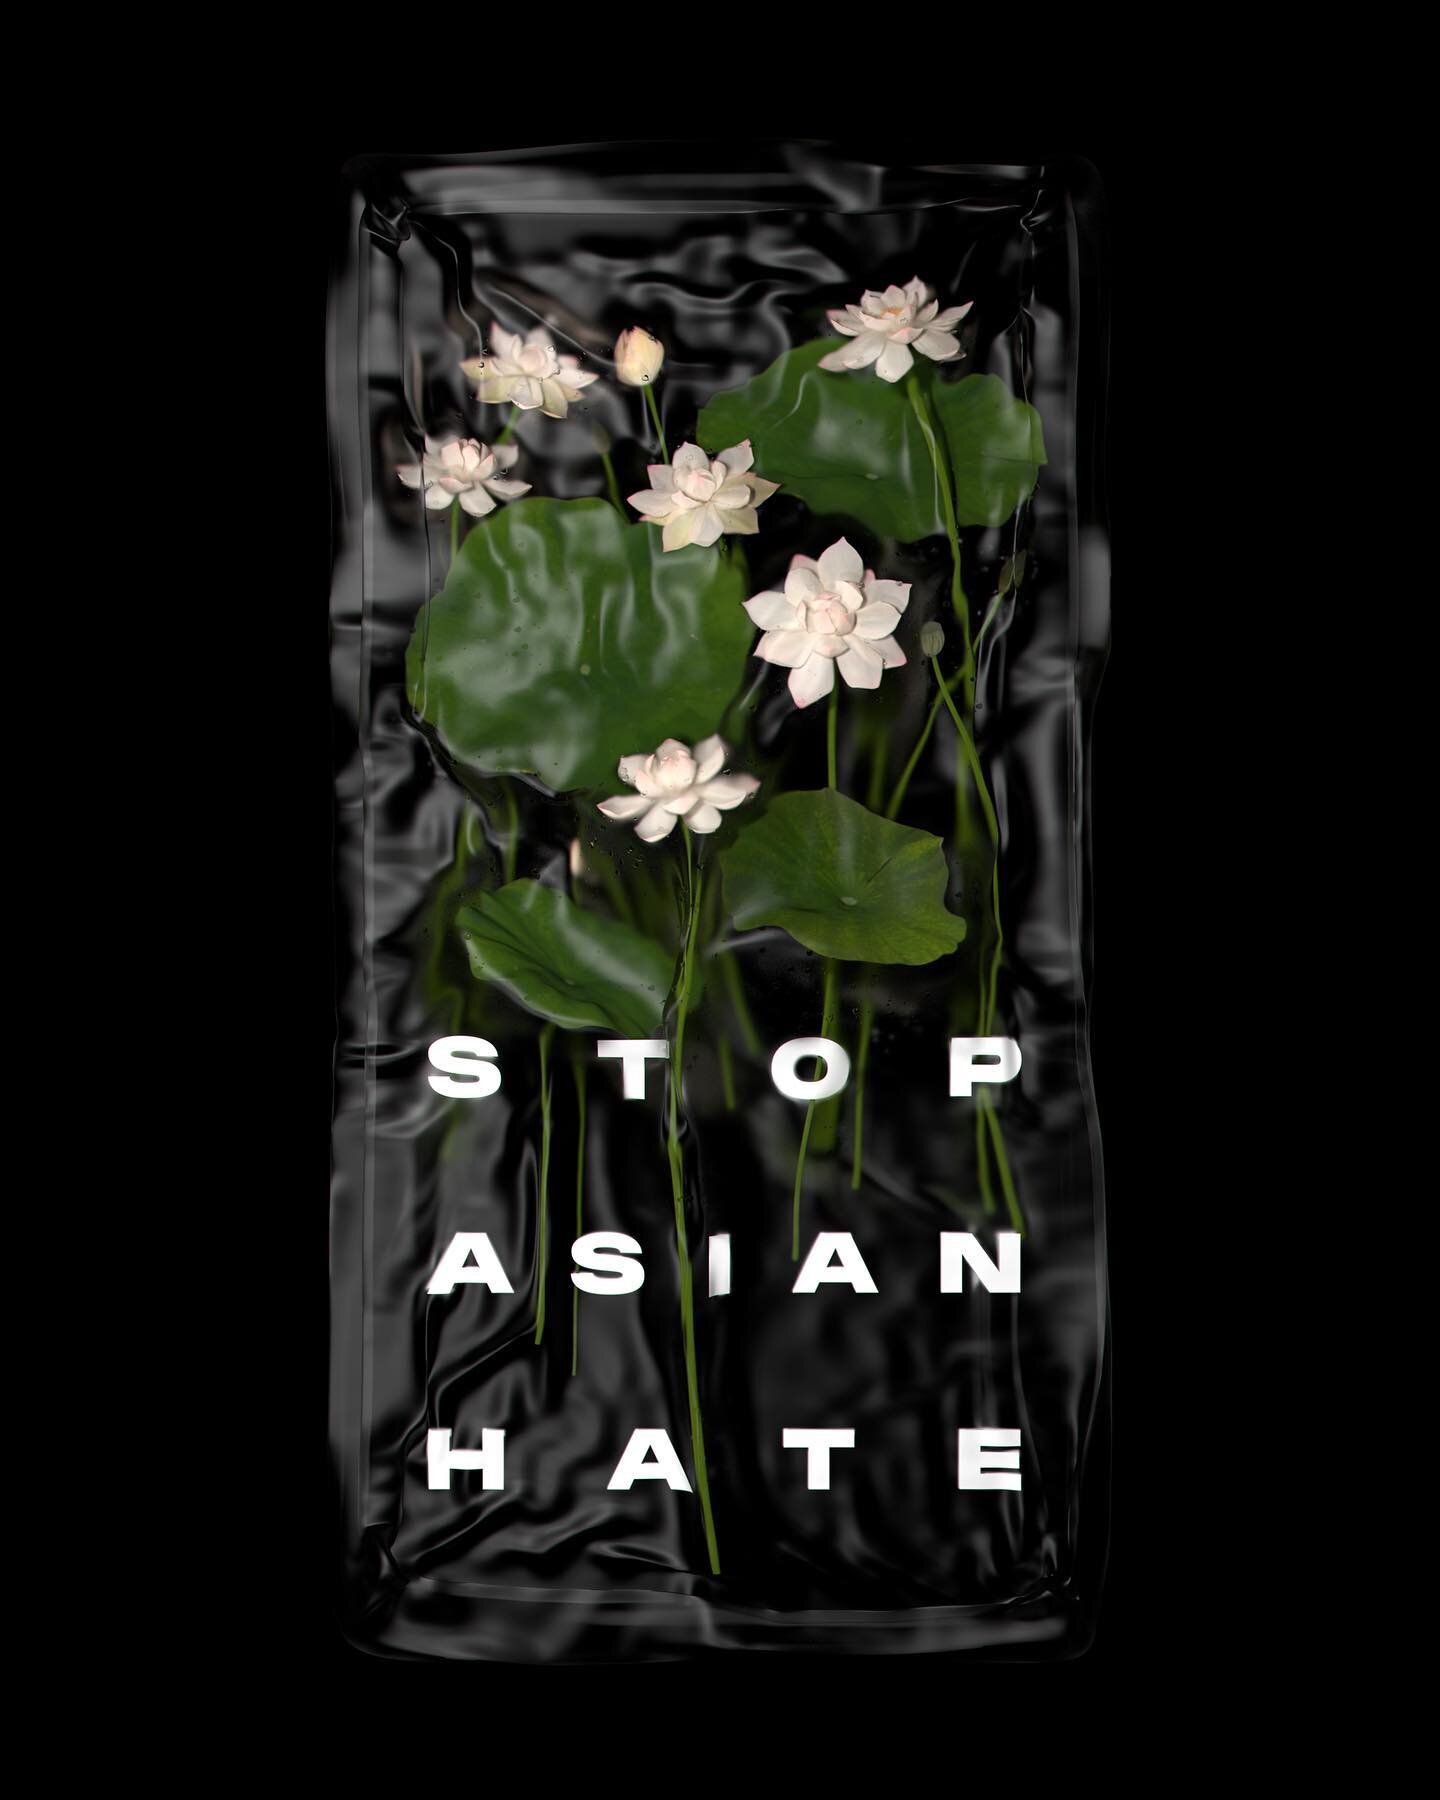 The upsurge of Anti-Asian sentiment and hate crimes is disgusting. While the racism we face is nothing new it is now obvious that those with such hateful views think they can exercise it through targeted violence.

Growing up as an Asian-American the